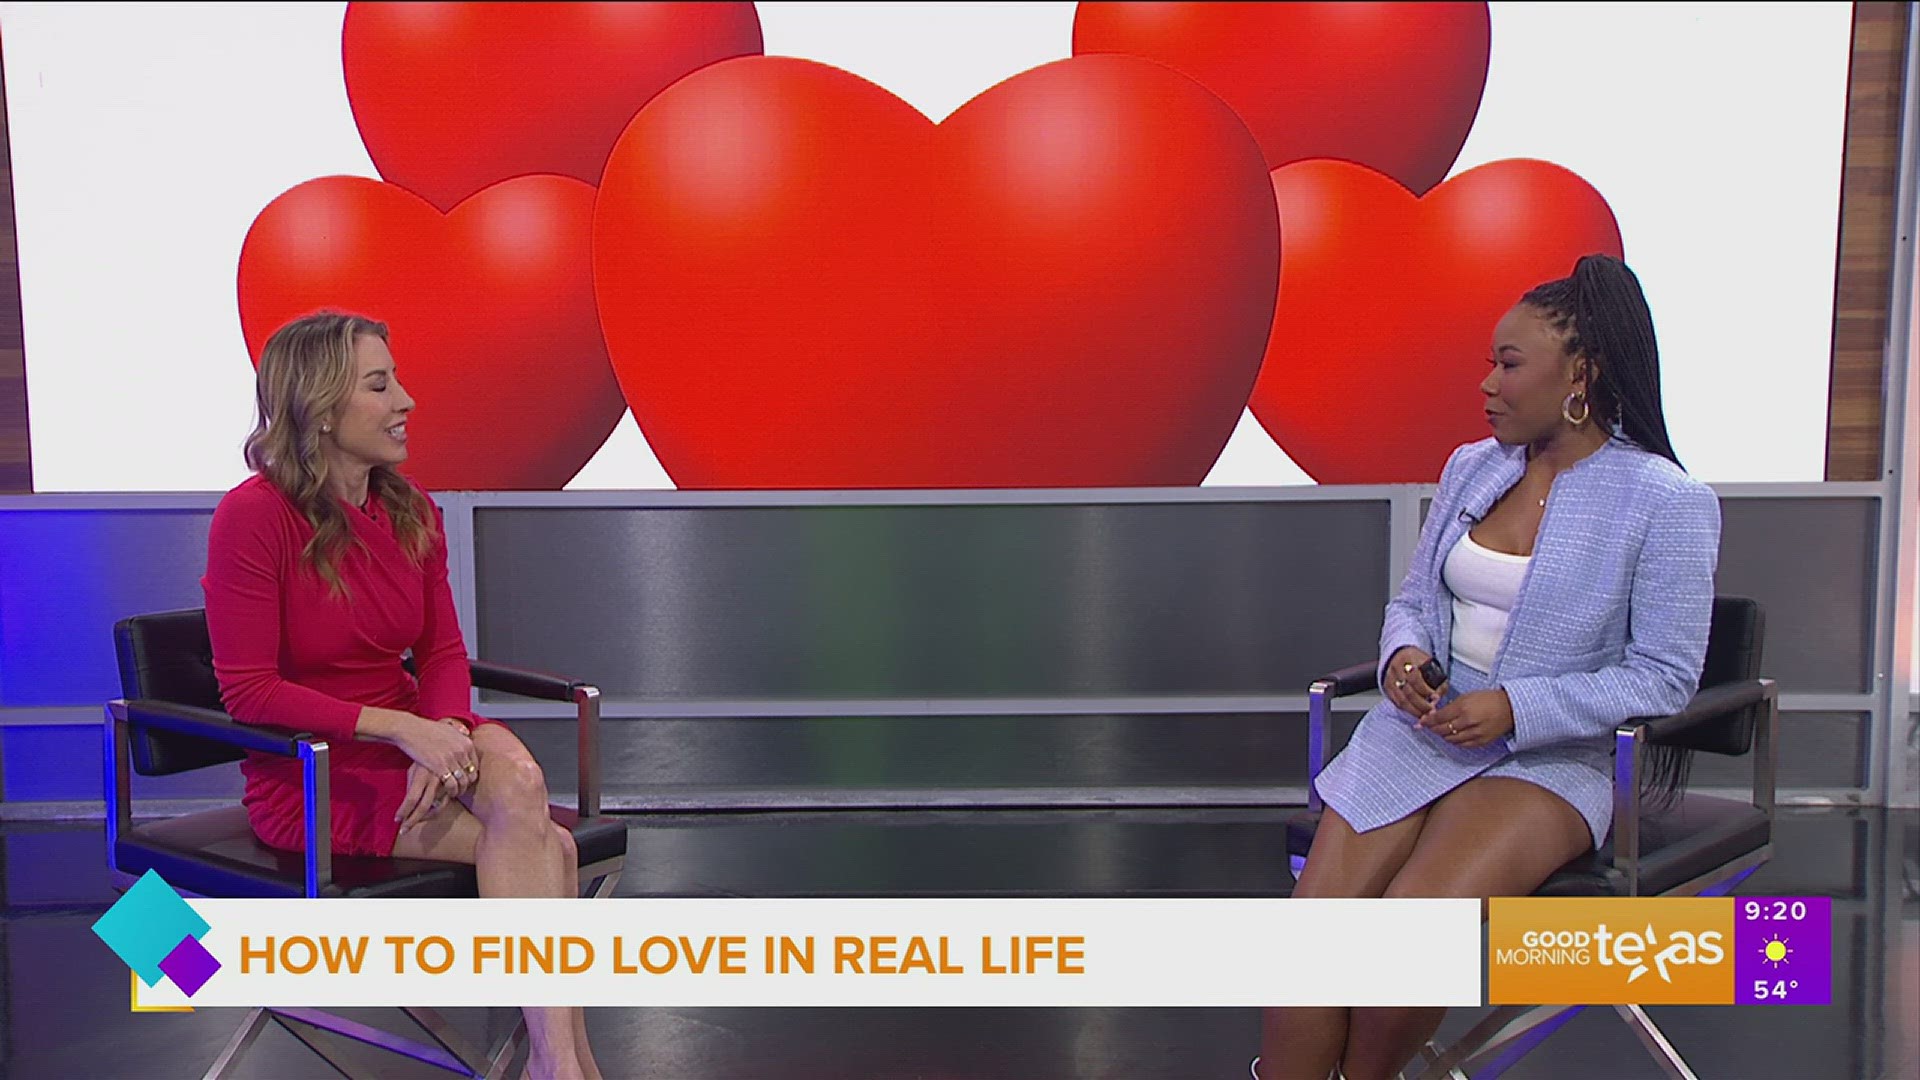 Valentine's Day is a week away. Find out how to find love in real life with these helpful tips.